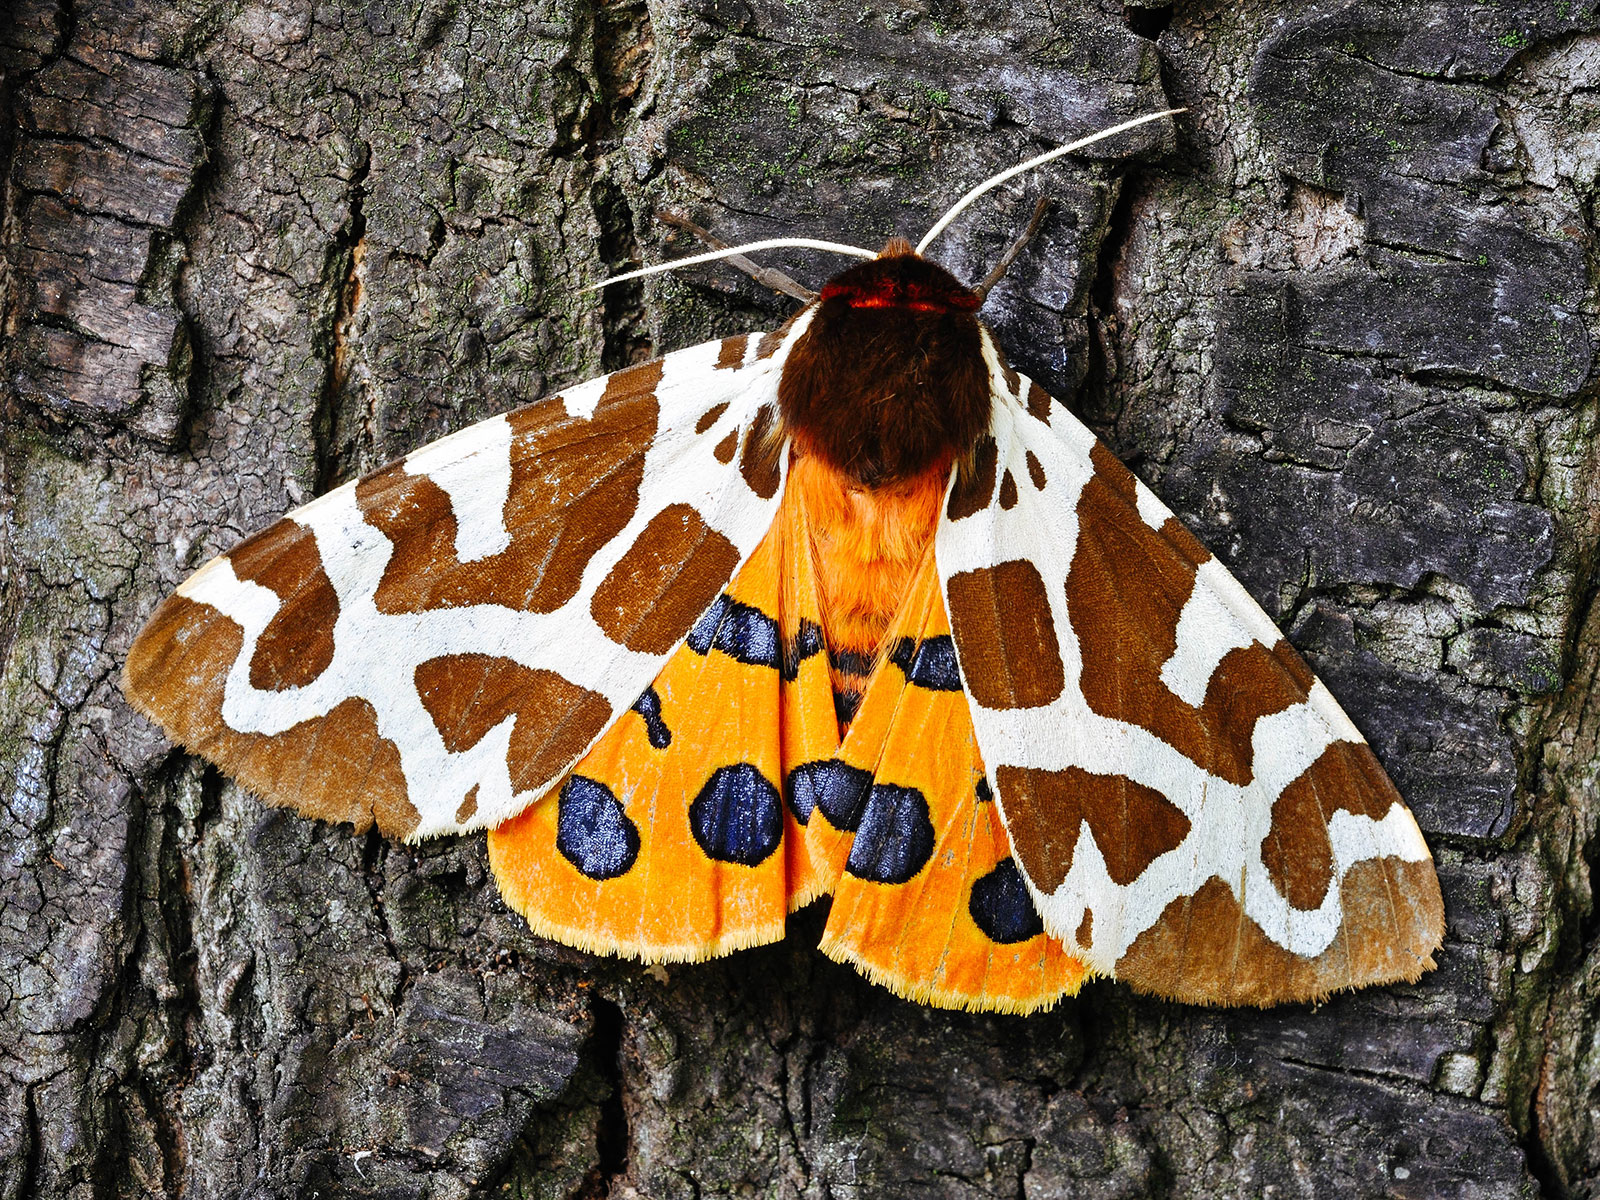 Tiger moth resting on the side of a tree trunk